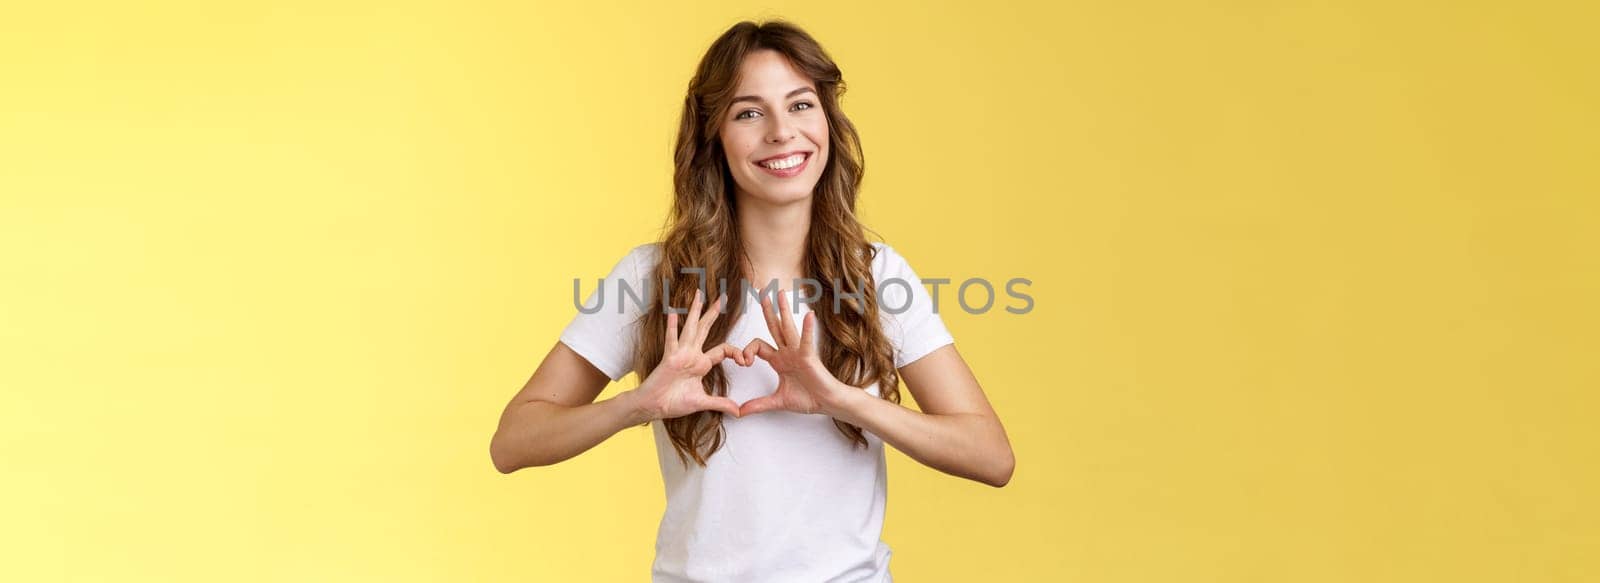 You my valantine. Tender confident adult girl curly hairstyle show heart gesture near chest express romantic sympathy feelings smiling delighted cherish relationship boyfriend yellow background.